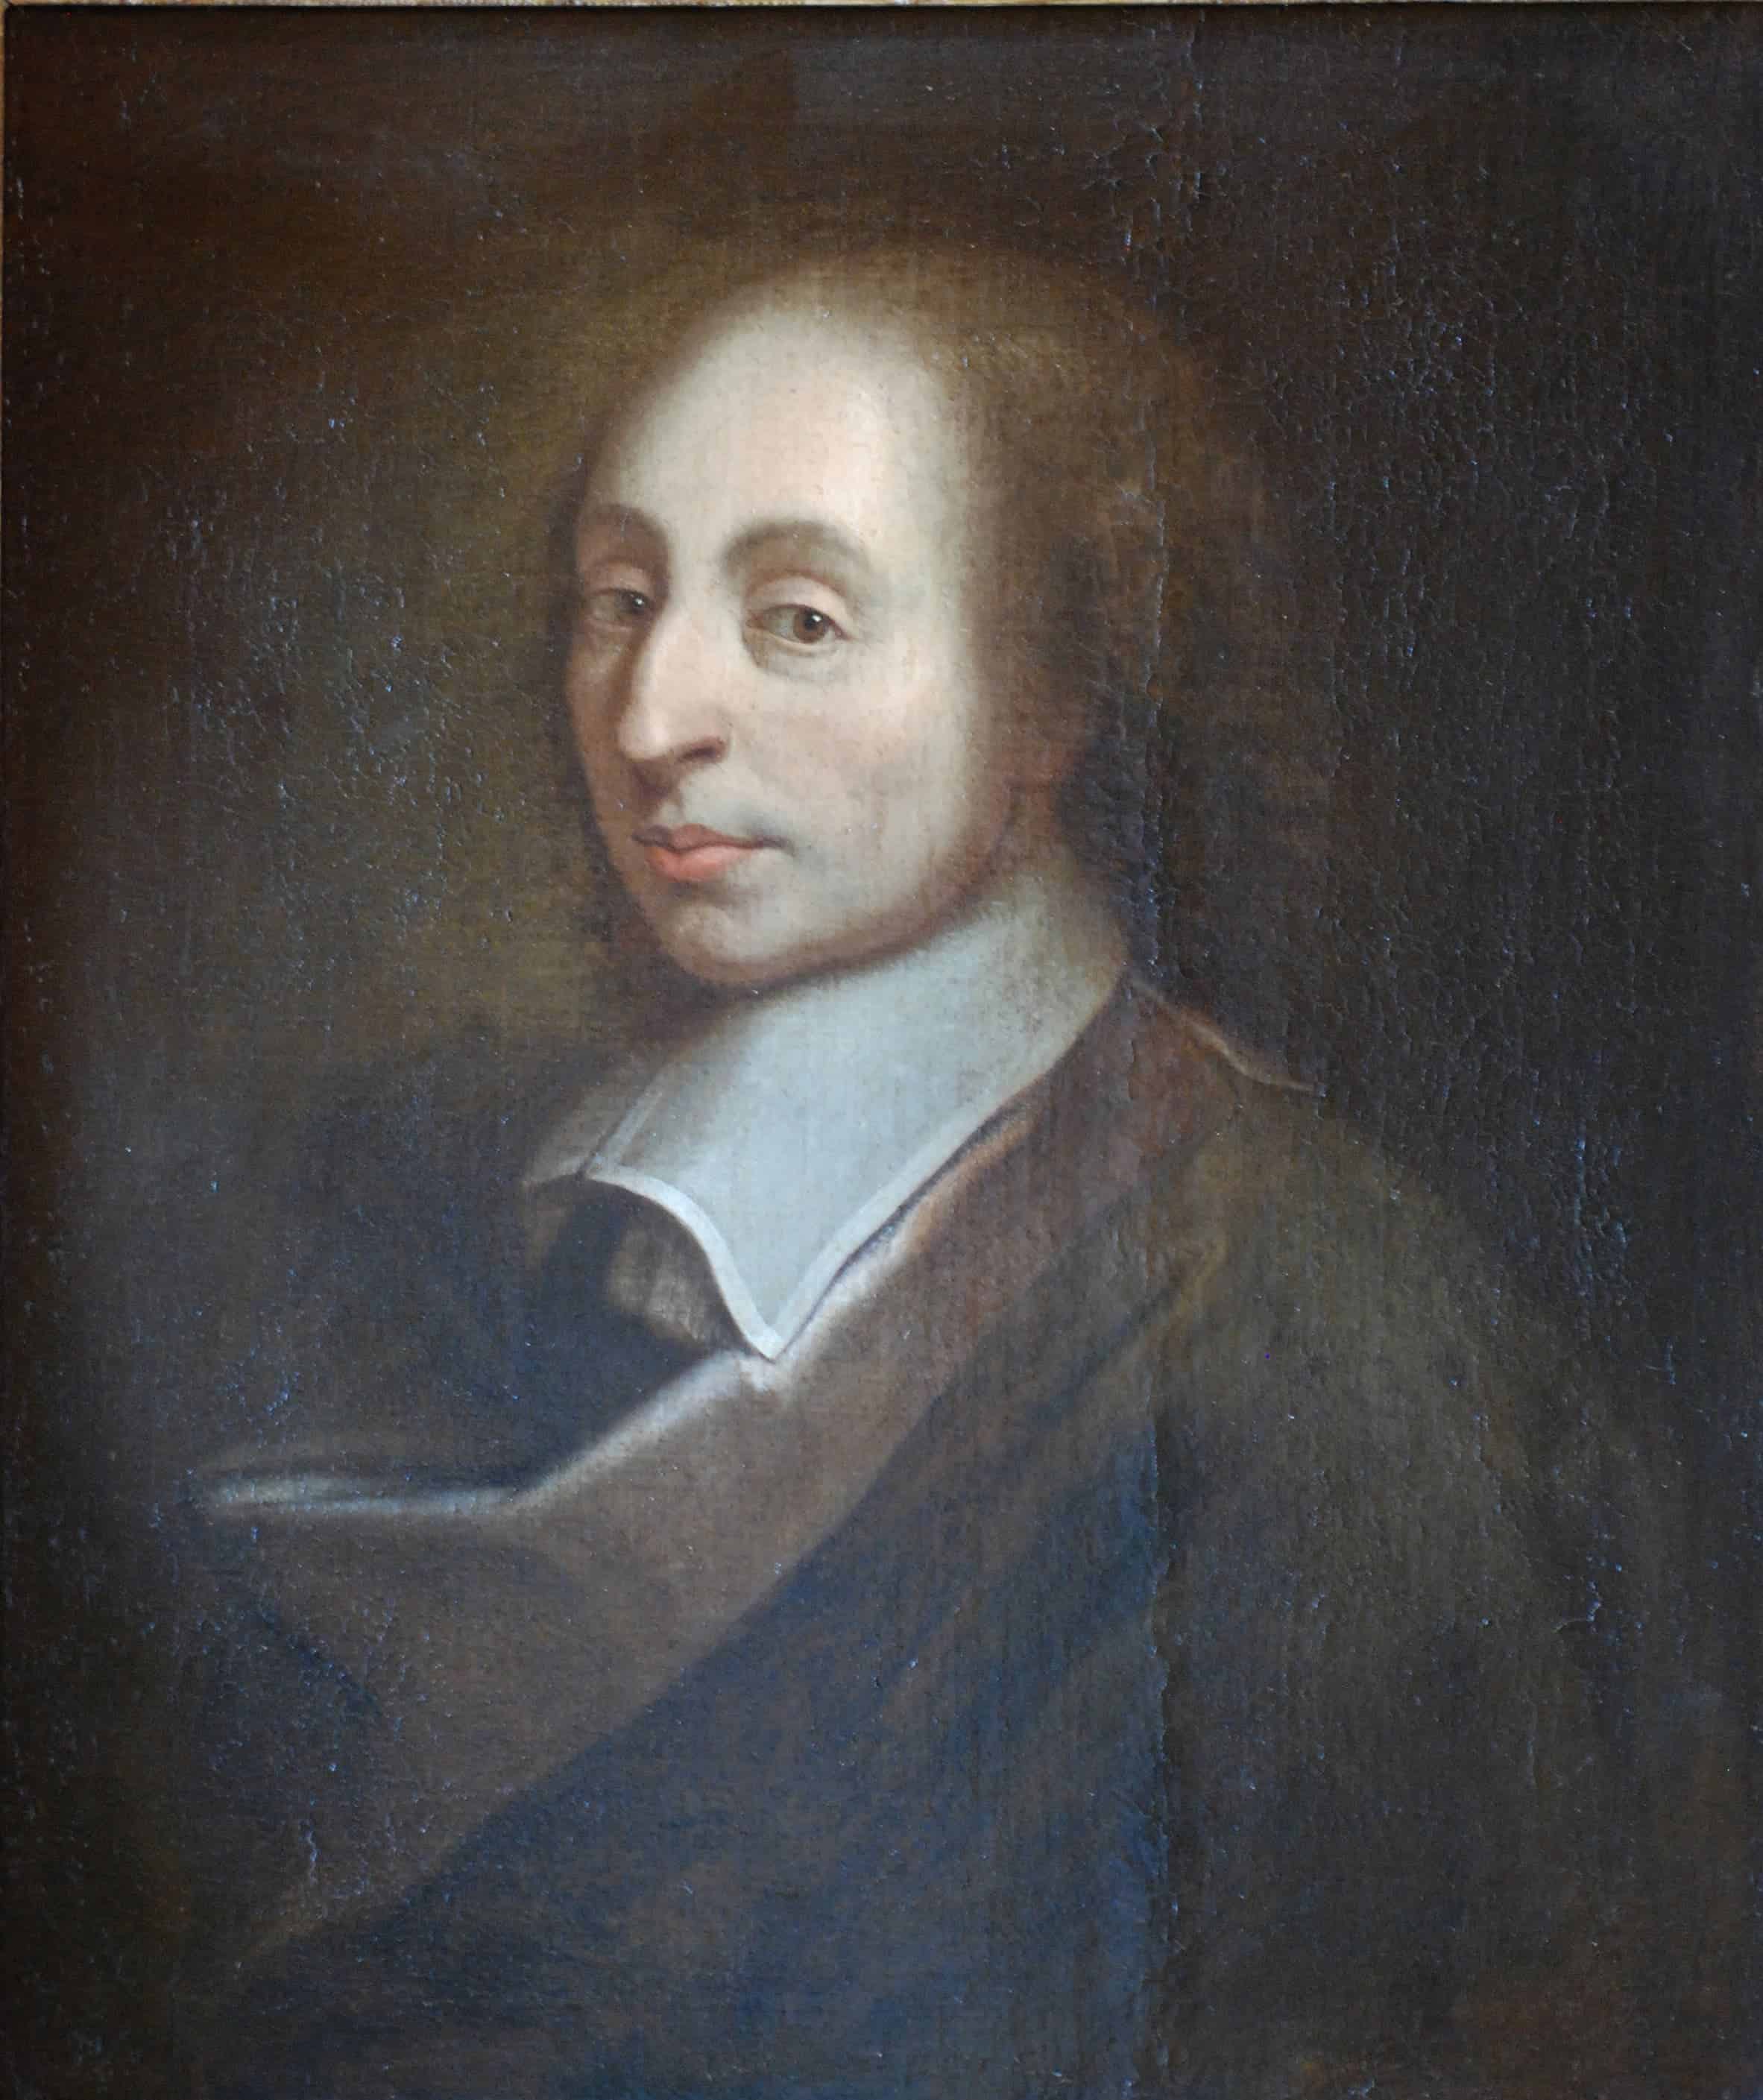 Painting of Blaise Pascal made by François II Quesnel for Gérard Edelinck in 1691.